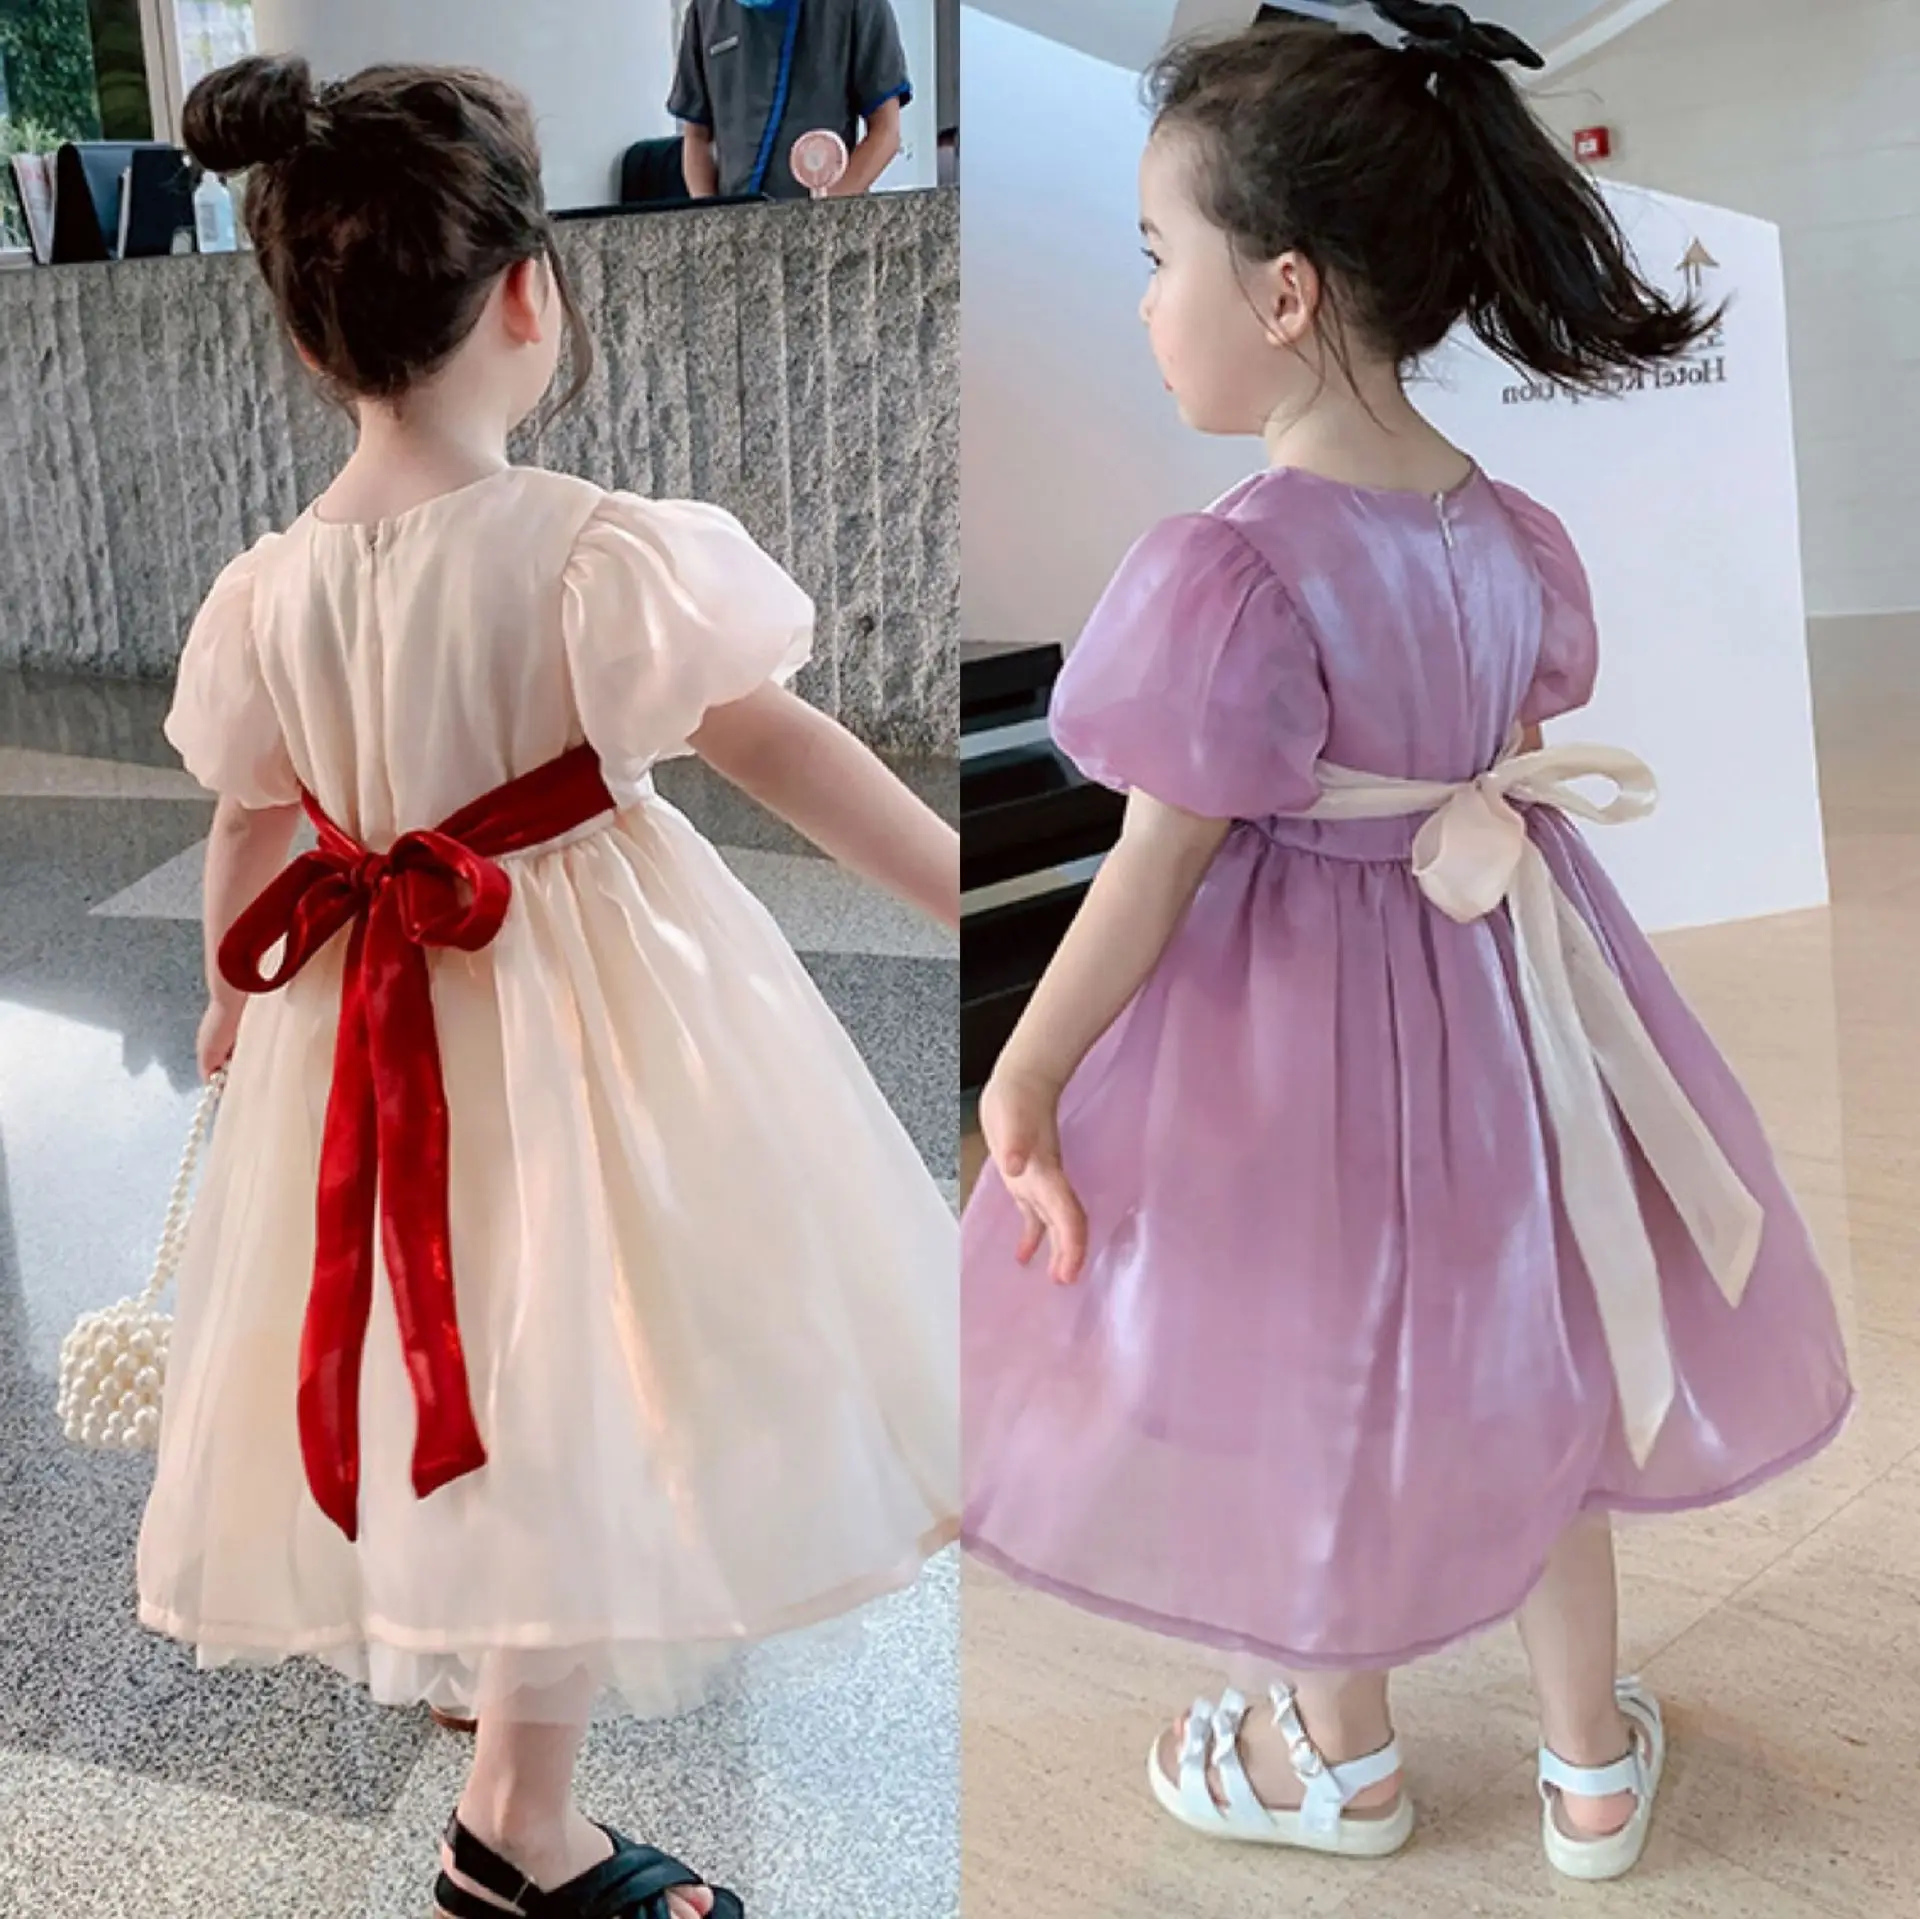 TILAMEHO New Baby Girls Dress Summer Kids Short Sleeve Cute Ball Gown Princess Bow Dresses for Girls Birthday Party Costume 2-6T